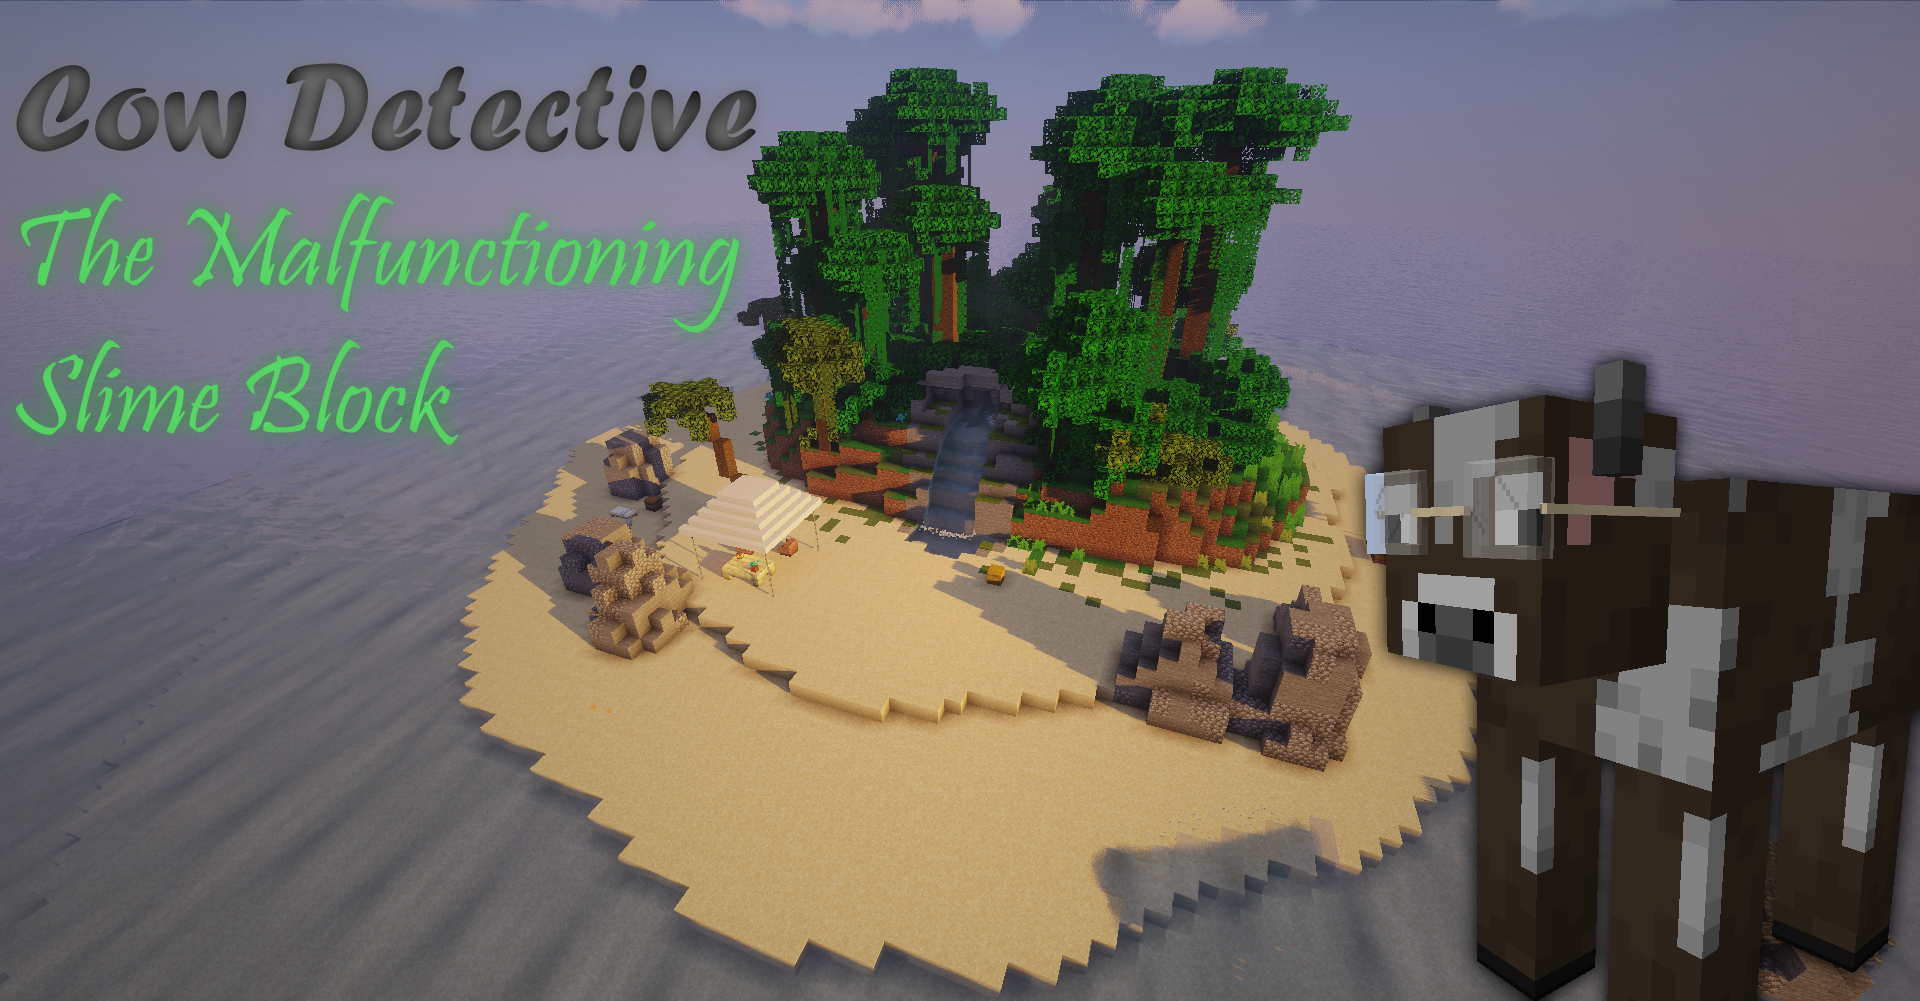 Download Cow Detective: The Malfunctioning Slime Block for Minecraft 1.16.4